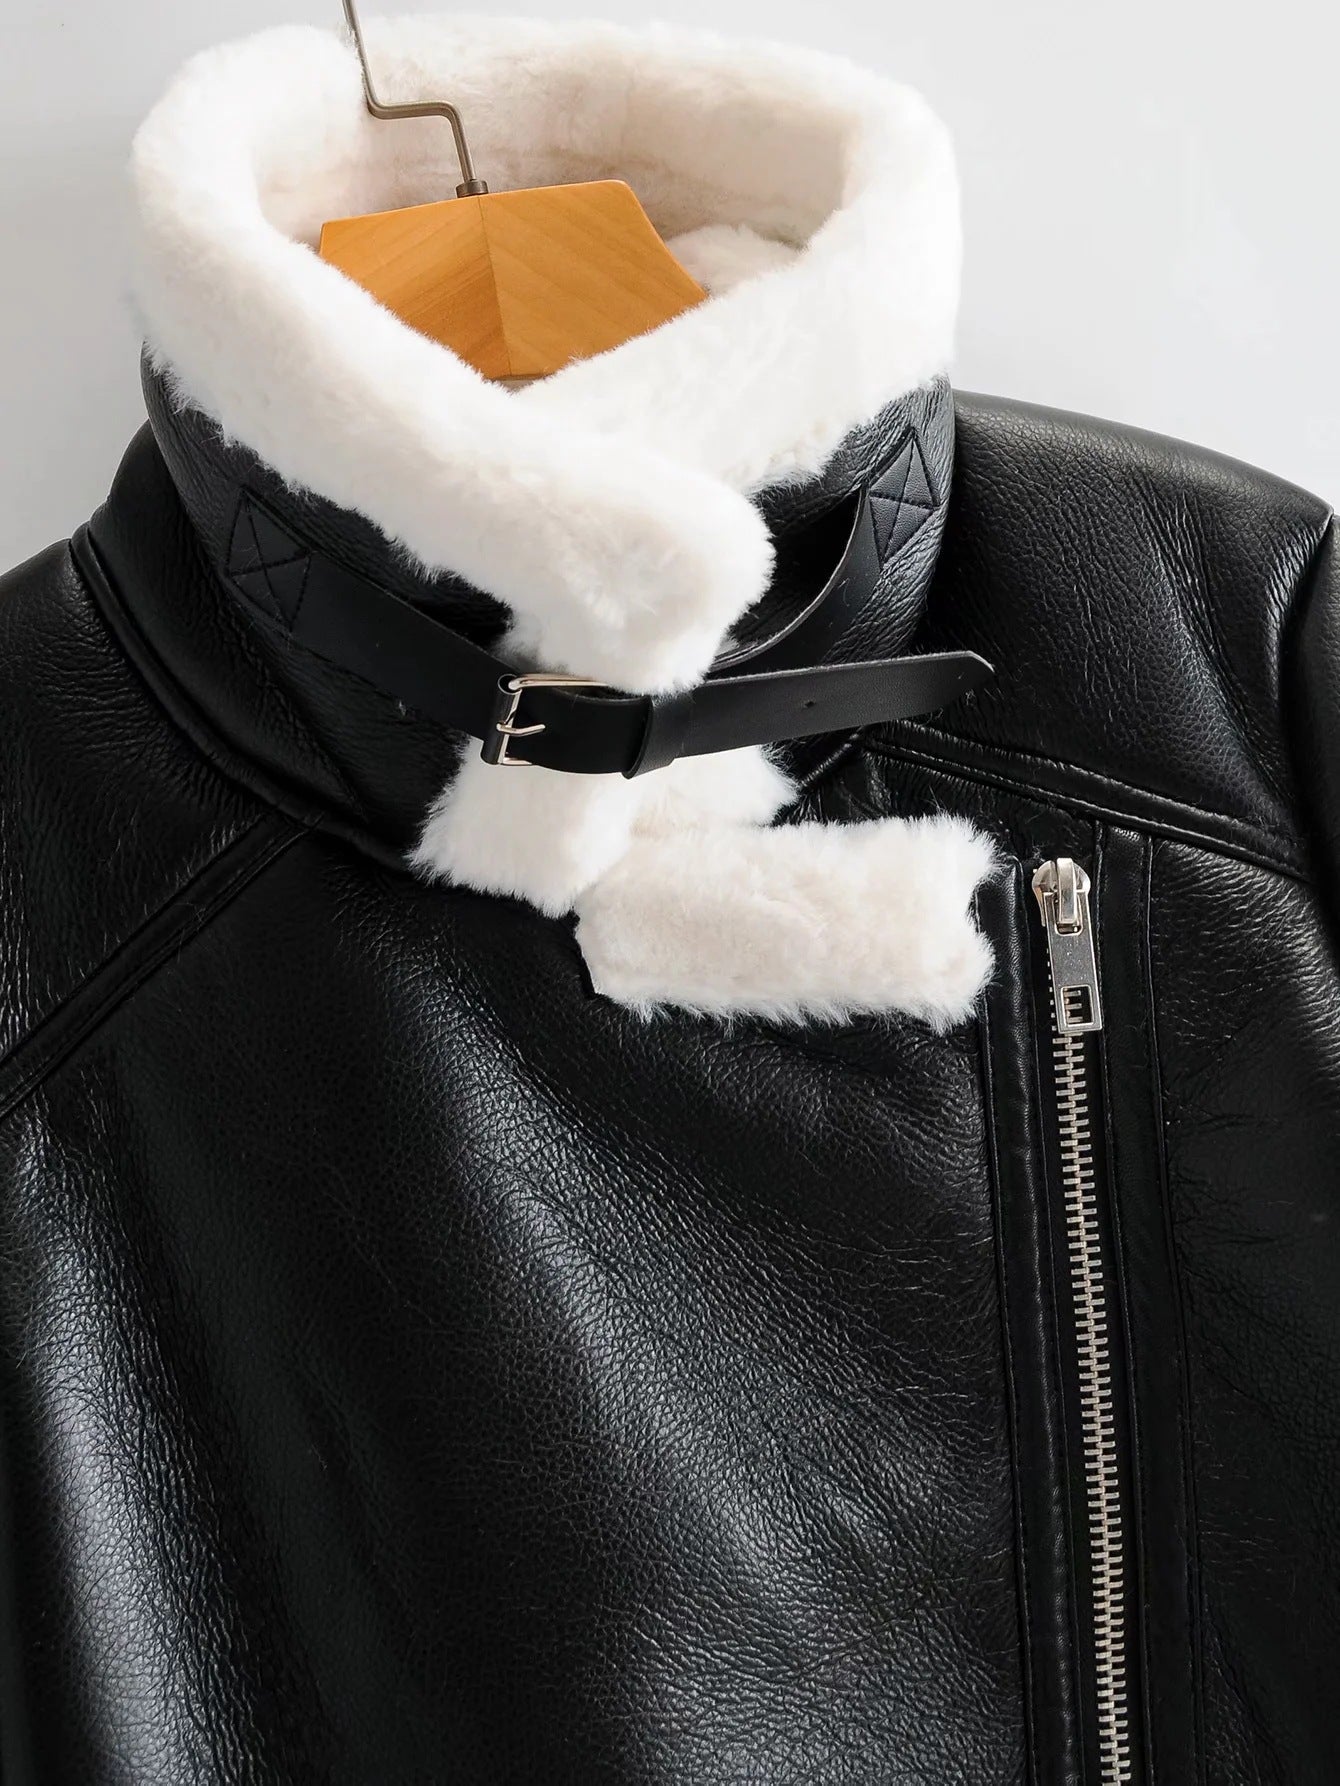 Autumn and Winter New Warm Fur All-in-one Leather Jacket